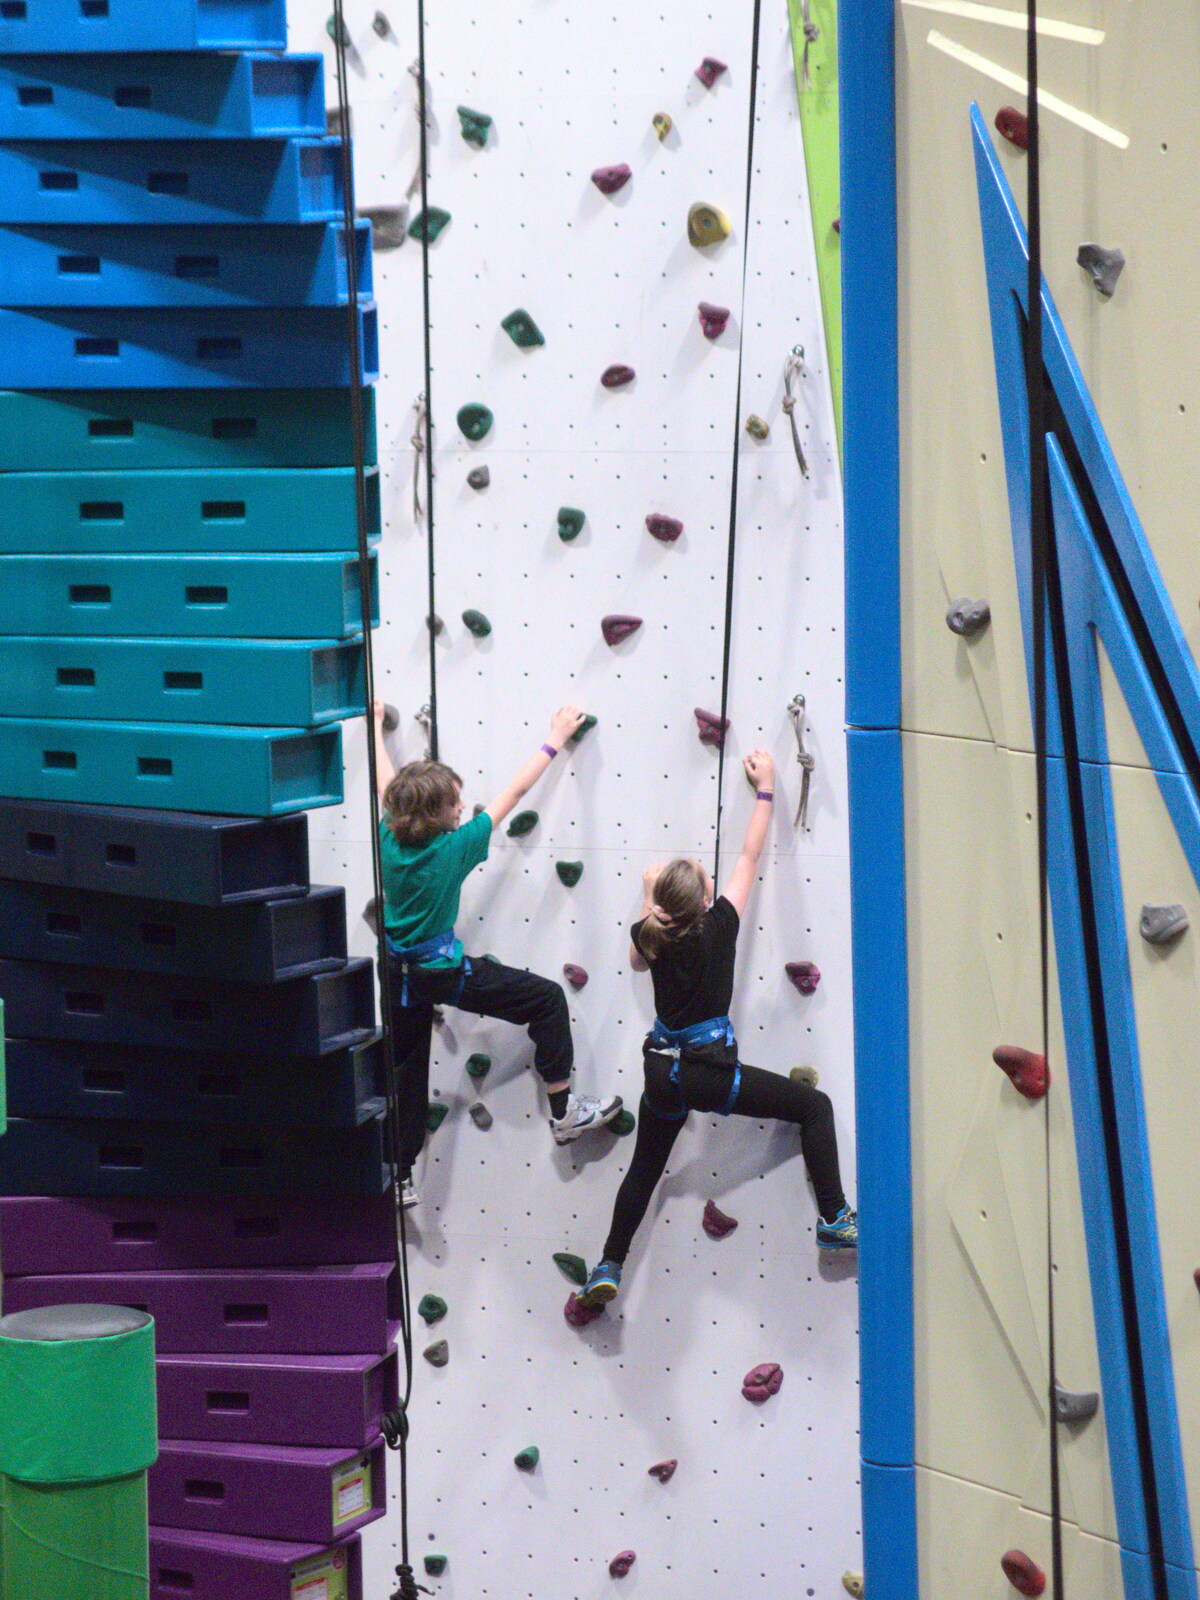 Some climbing action from Clip and Climb, The Havens, Ipswich - 15th February 2020